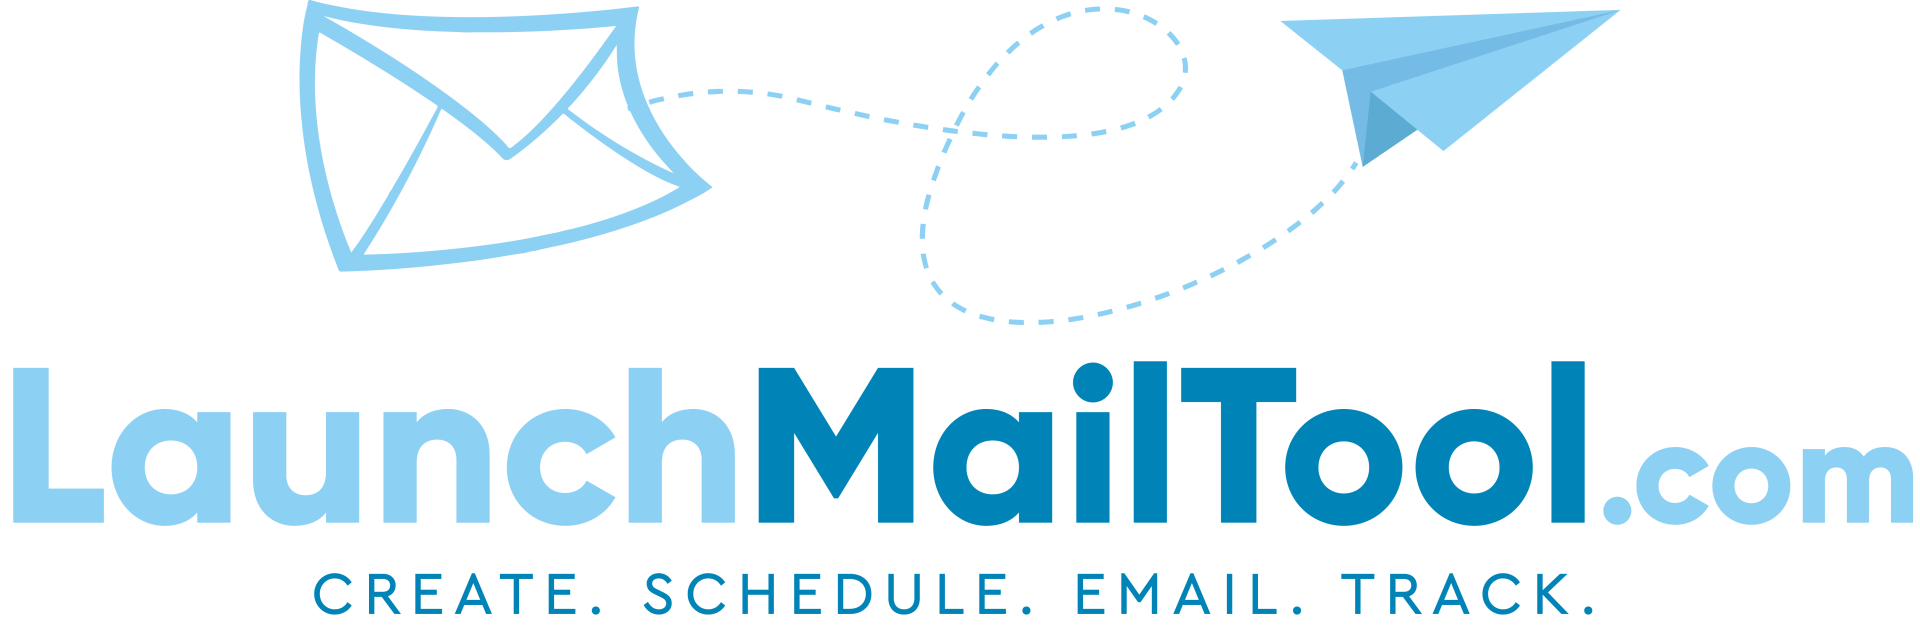 LaunchMailTool.com - Create - Schedule - Email - Track.